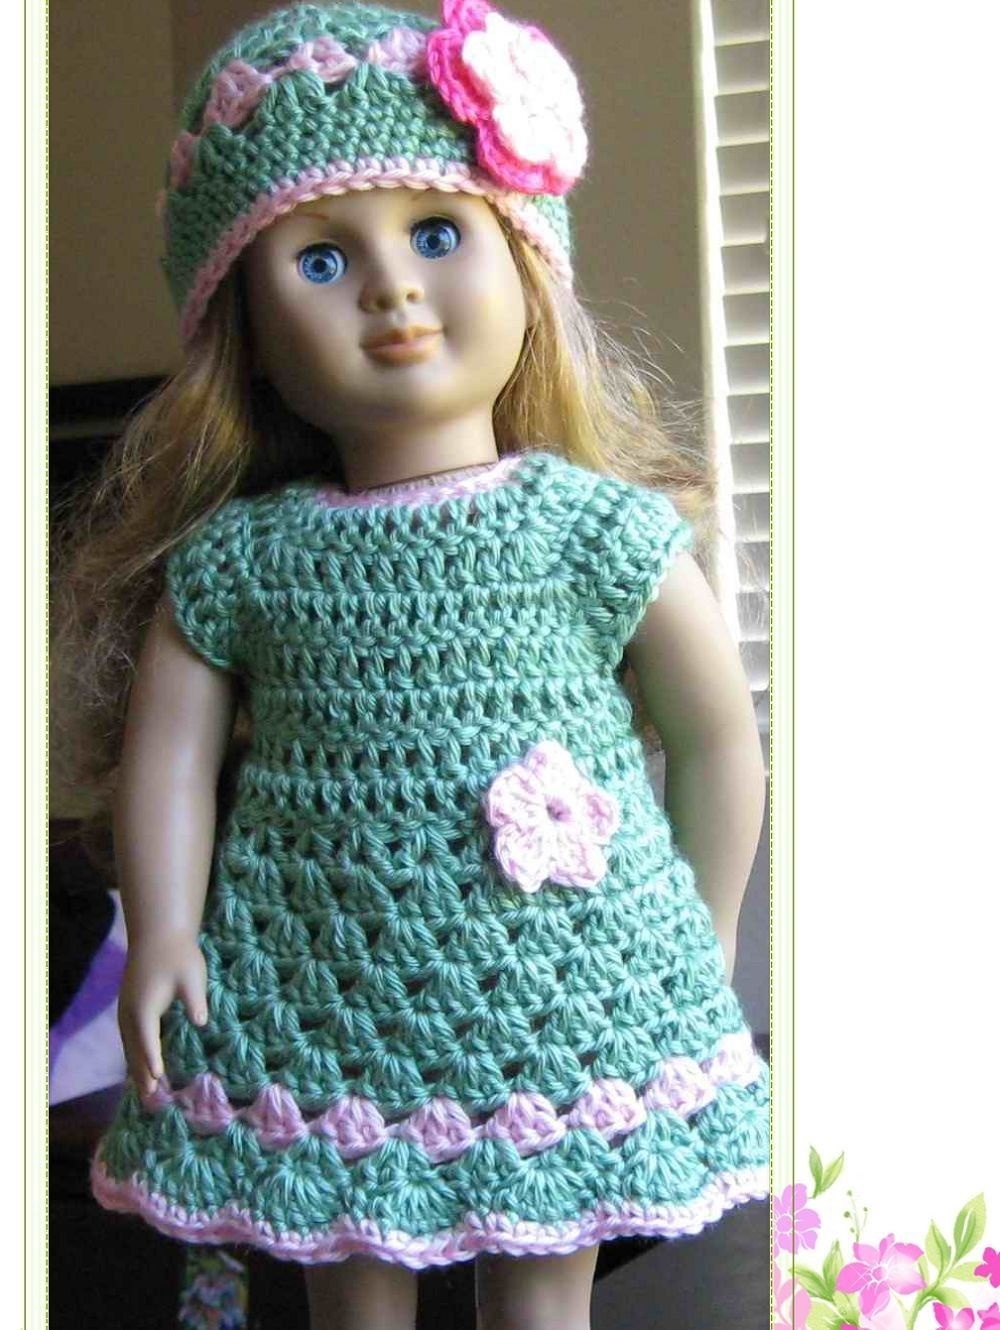 Barbie Doll Clothes Patterns Free | Crochet Patterns: Barbie Doll - Free Printable Crochet Doll Clothes Patterns For 18 Inch Dolls